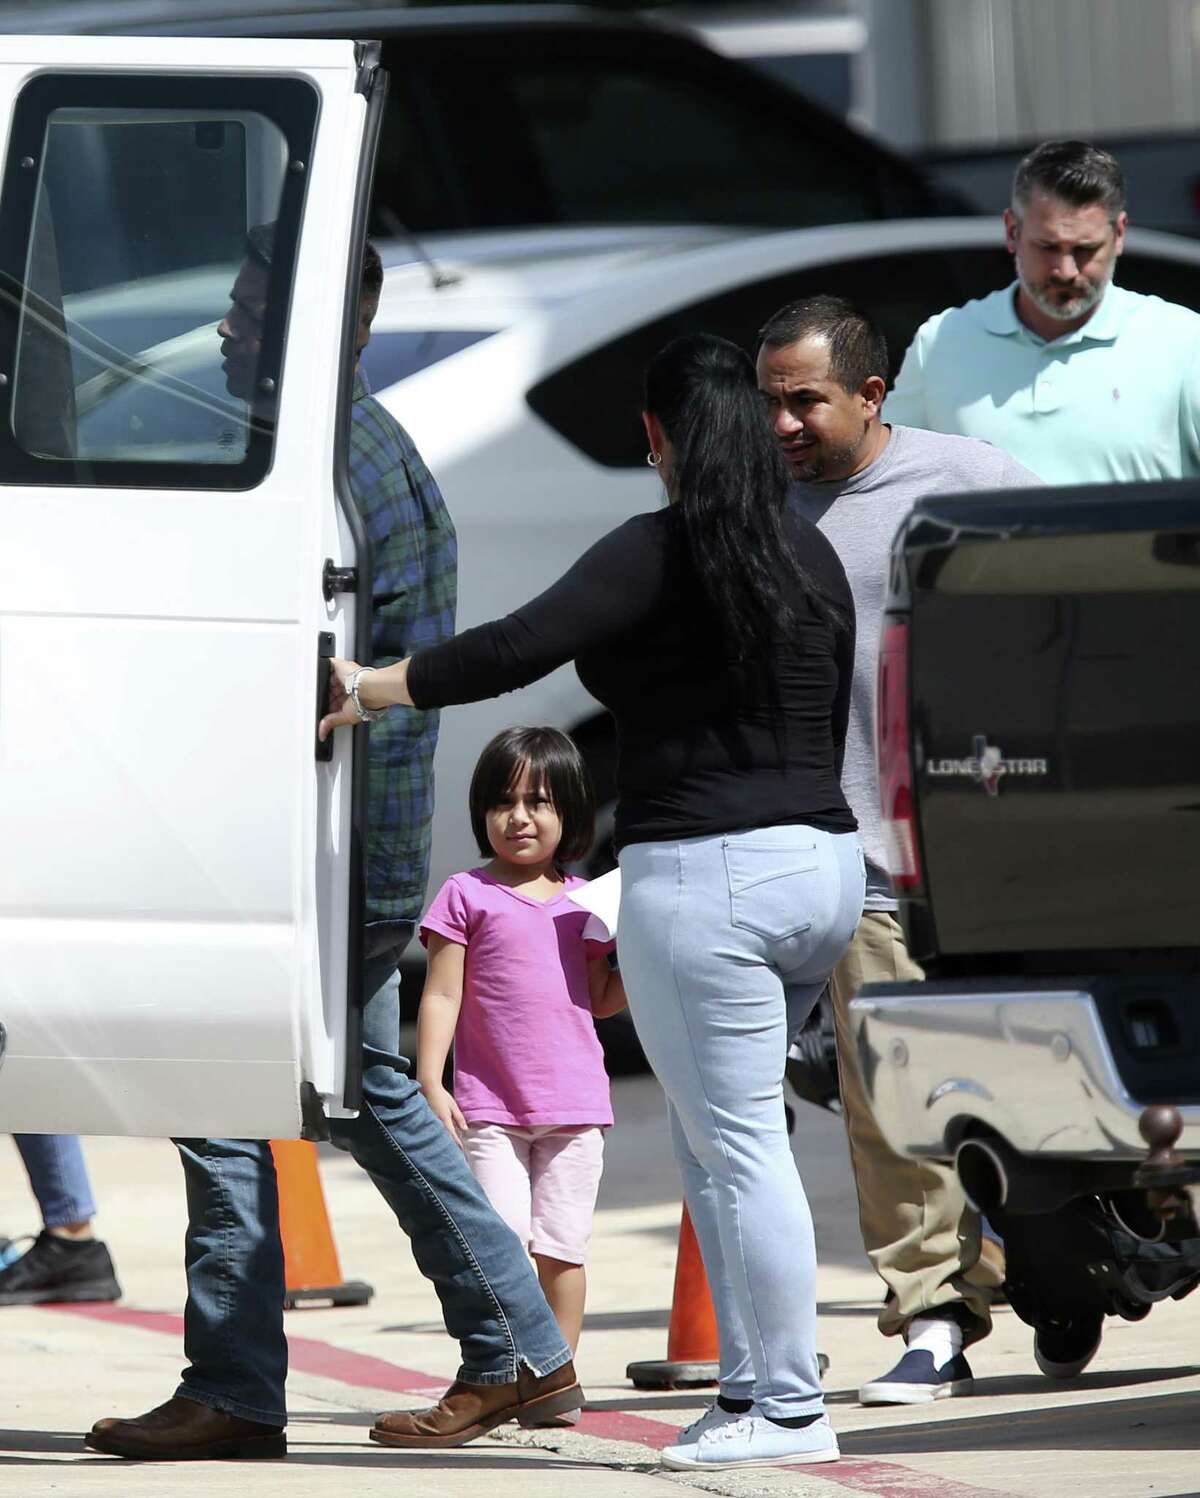 Immigrant families leave a U.S Immigration and Customs Enforcement facility after they were reunited overnight in San Antonio, Wednesday, July 11, 2018. The two vans headed to the Archdiocese of San Antonio Catholic Charities offices. Several immigrant families were seen in the vans.